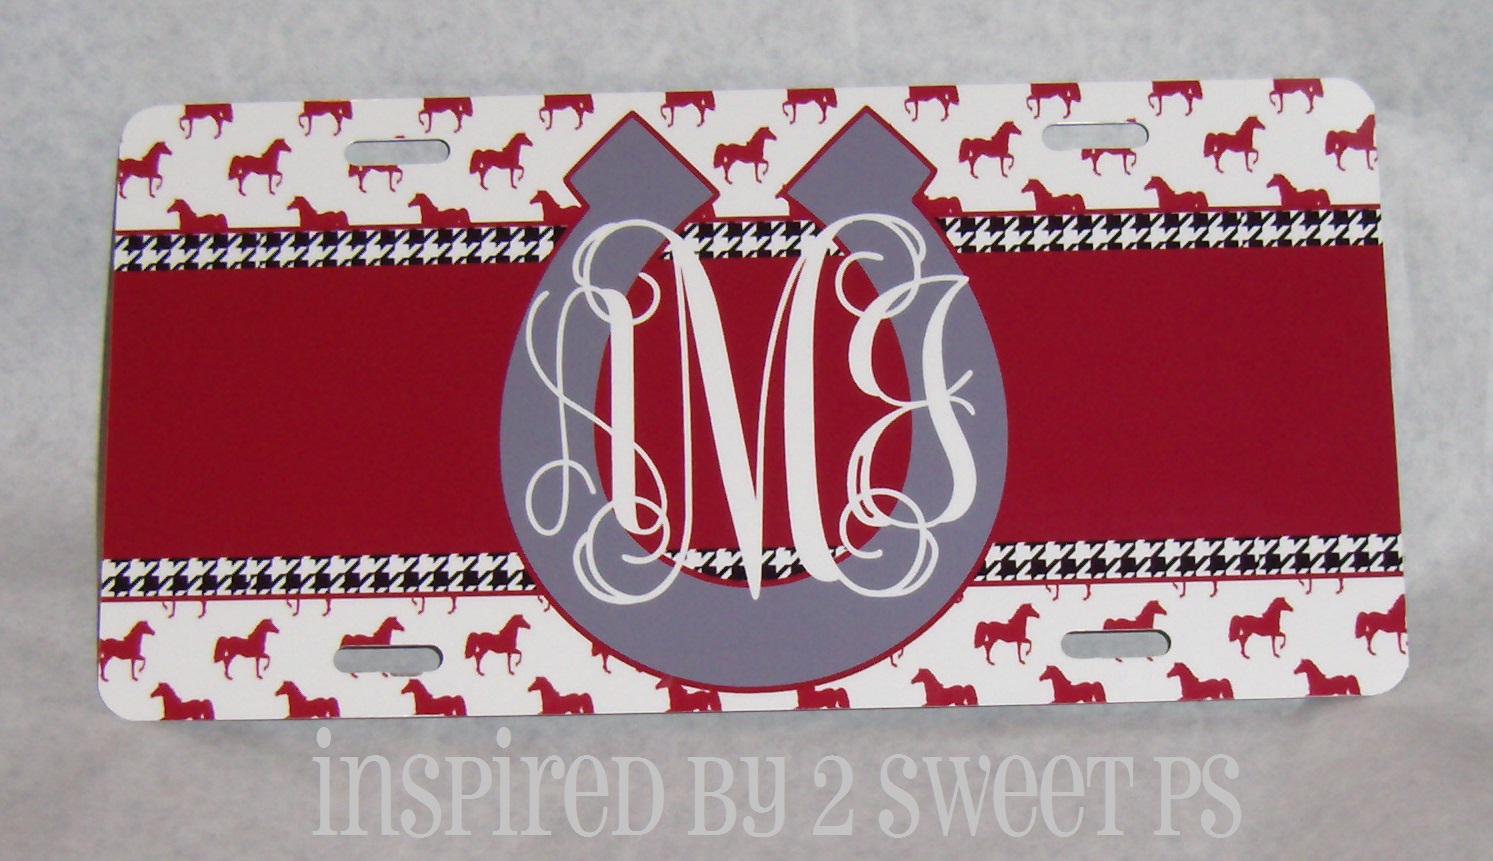 Horse Inspired Tag made with sublimation printing